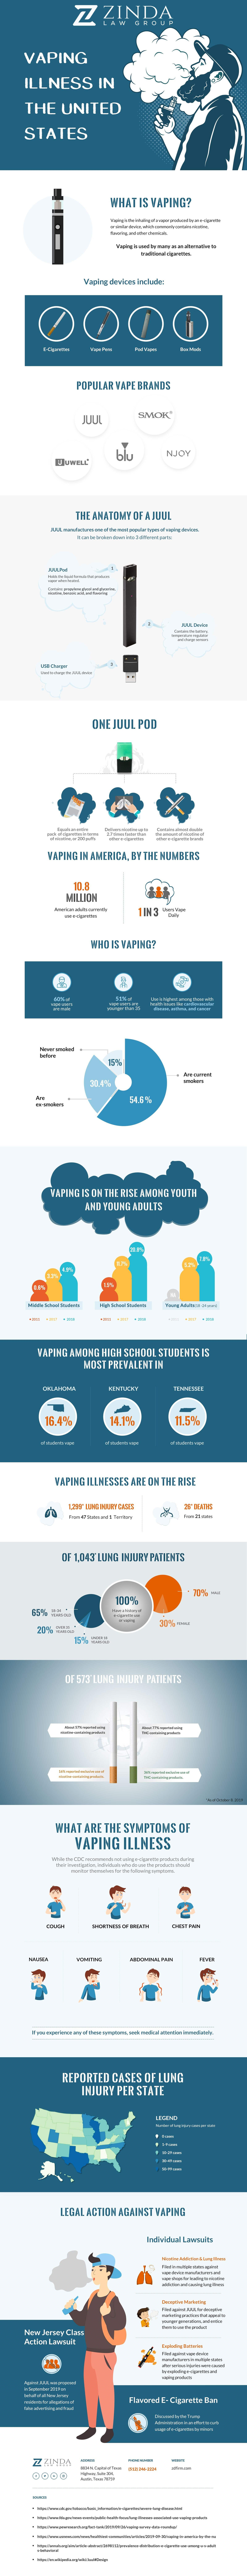 Infographic about vaping illness in the United States